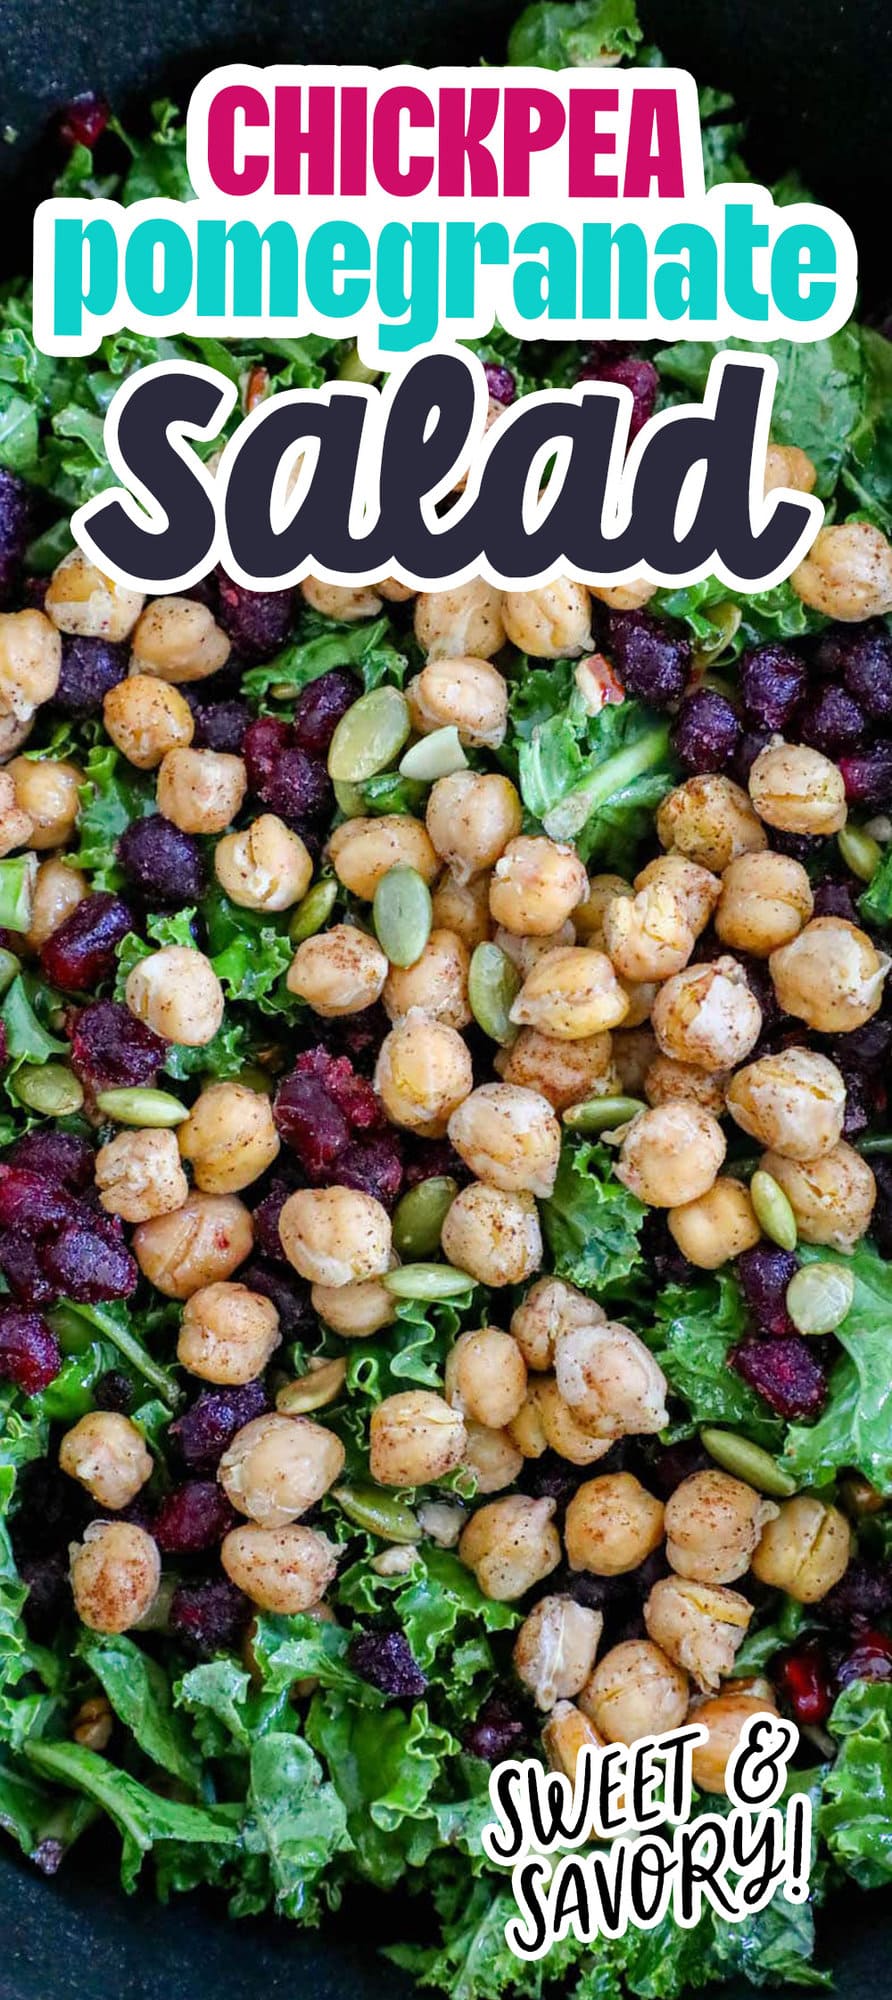 kale salad in a bowl with chickpeas, dried cranberries, pomegranate arils, pepitas, and dressing